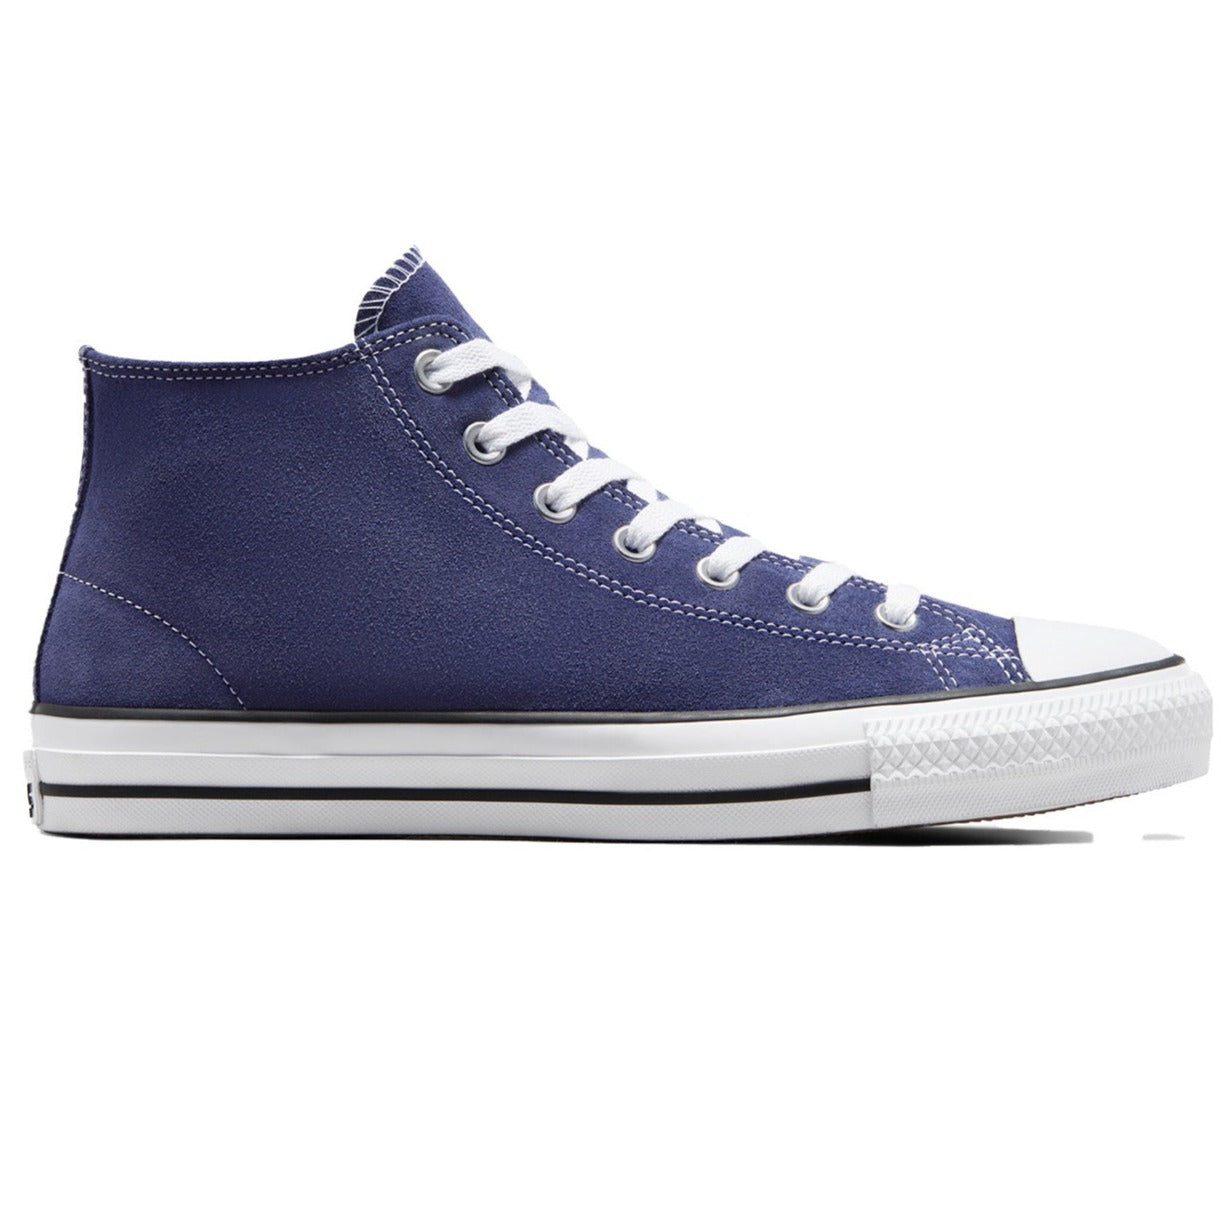 Converse CTAS Pro Mid Uncharted Waters